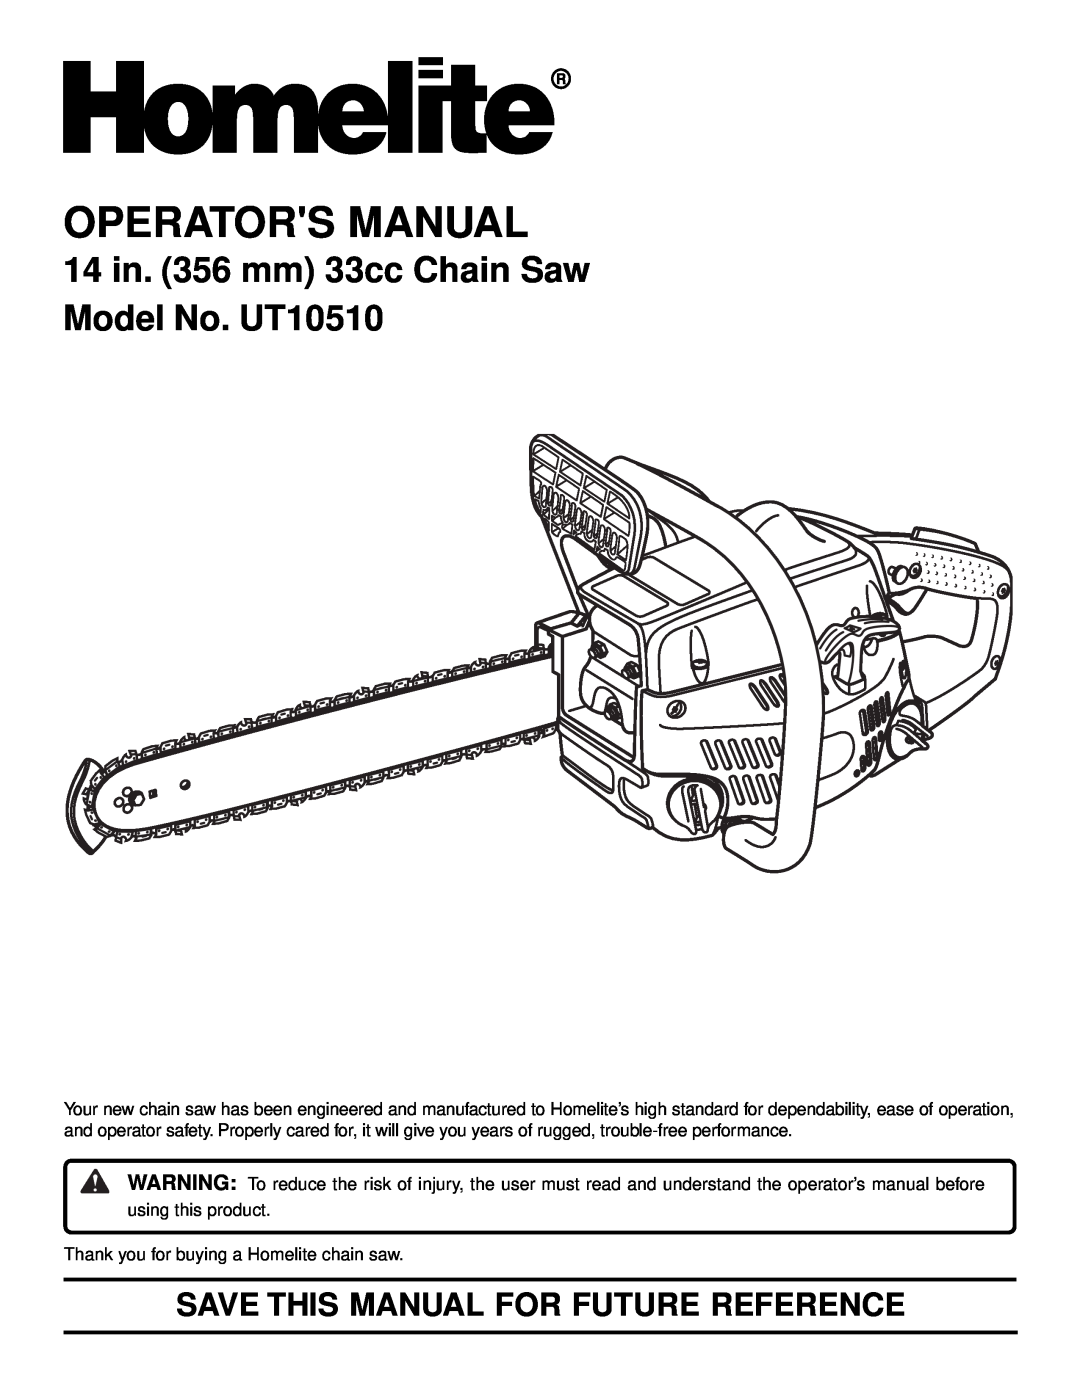 Homelite manual Operators Manual, 14 in. 356 mm 33cc Chain Saw Model No. UT10510, Save This Manual For Future Reference 